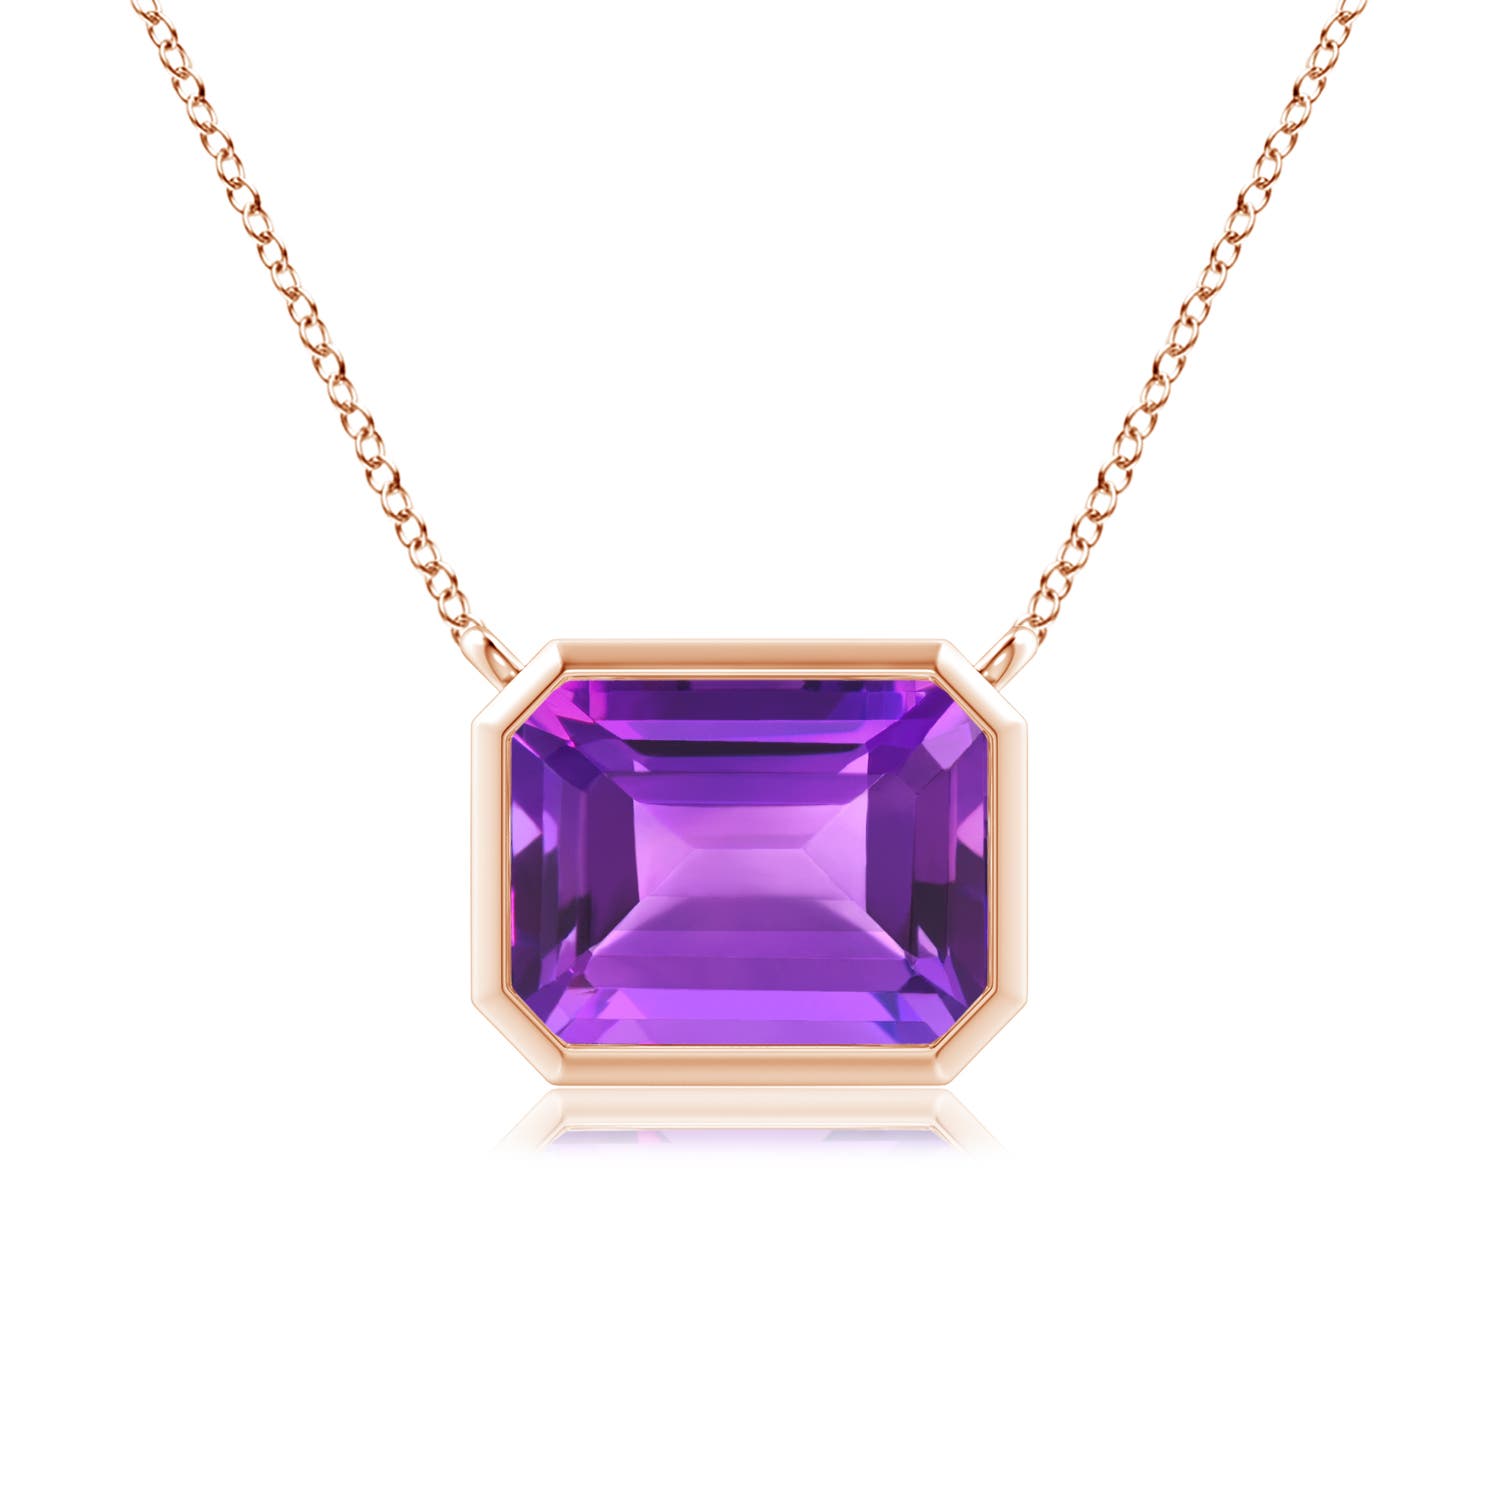 AAA - Amethyst / 2.2 CT / 14 KT Rose Gold